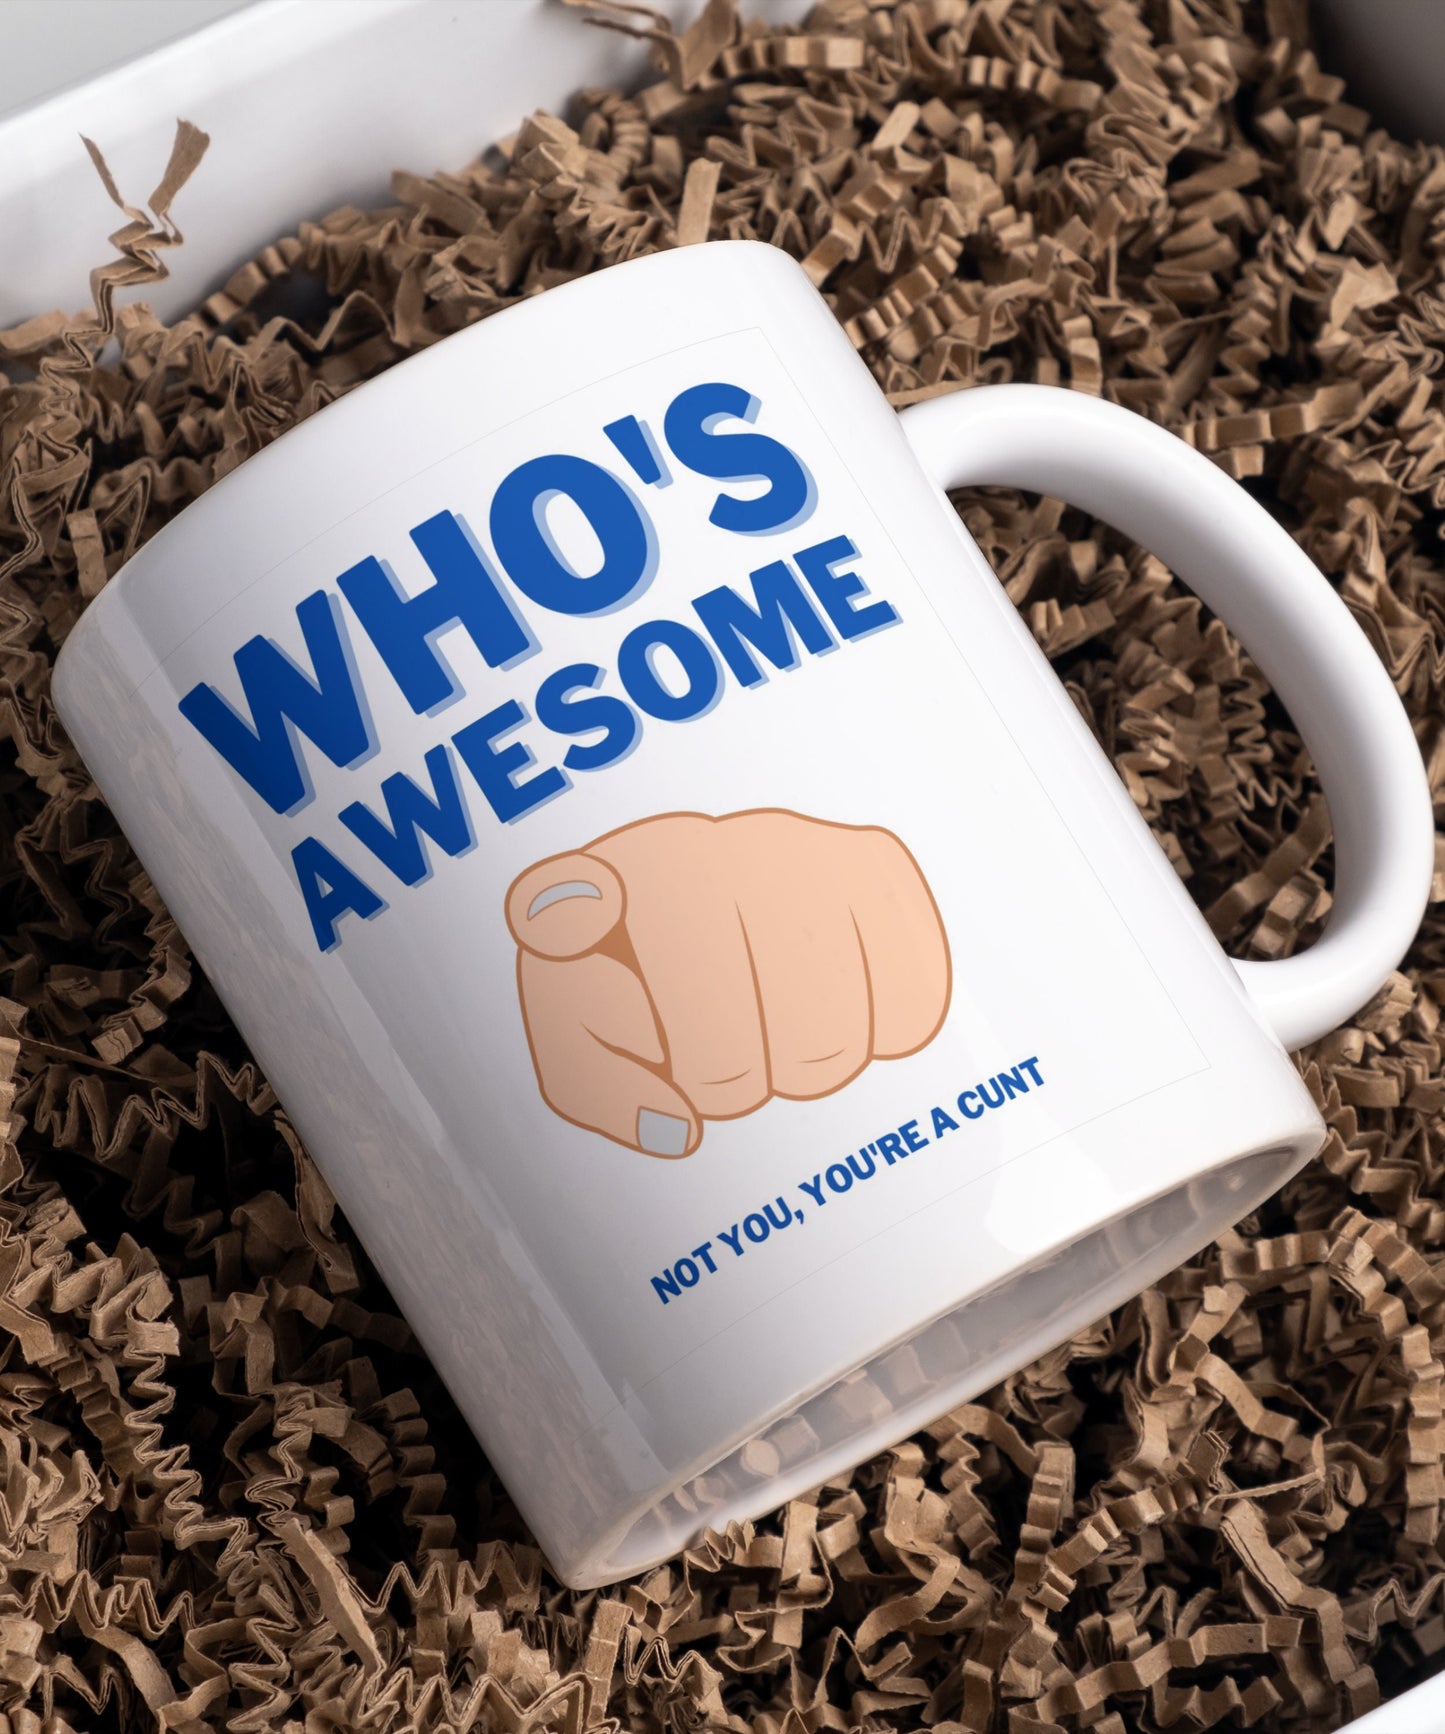 Who's awesome, not you you're a cunt mug